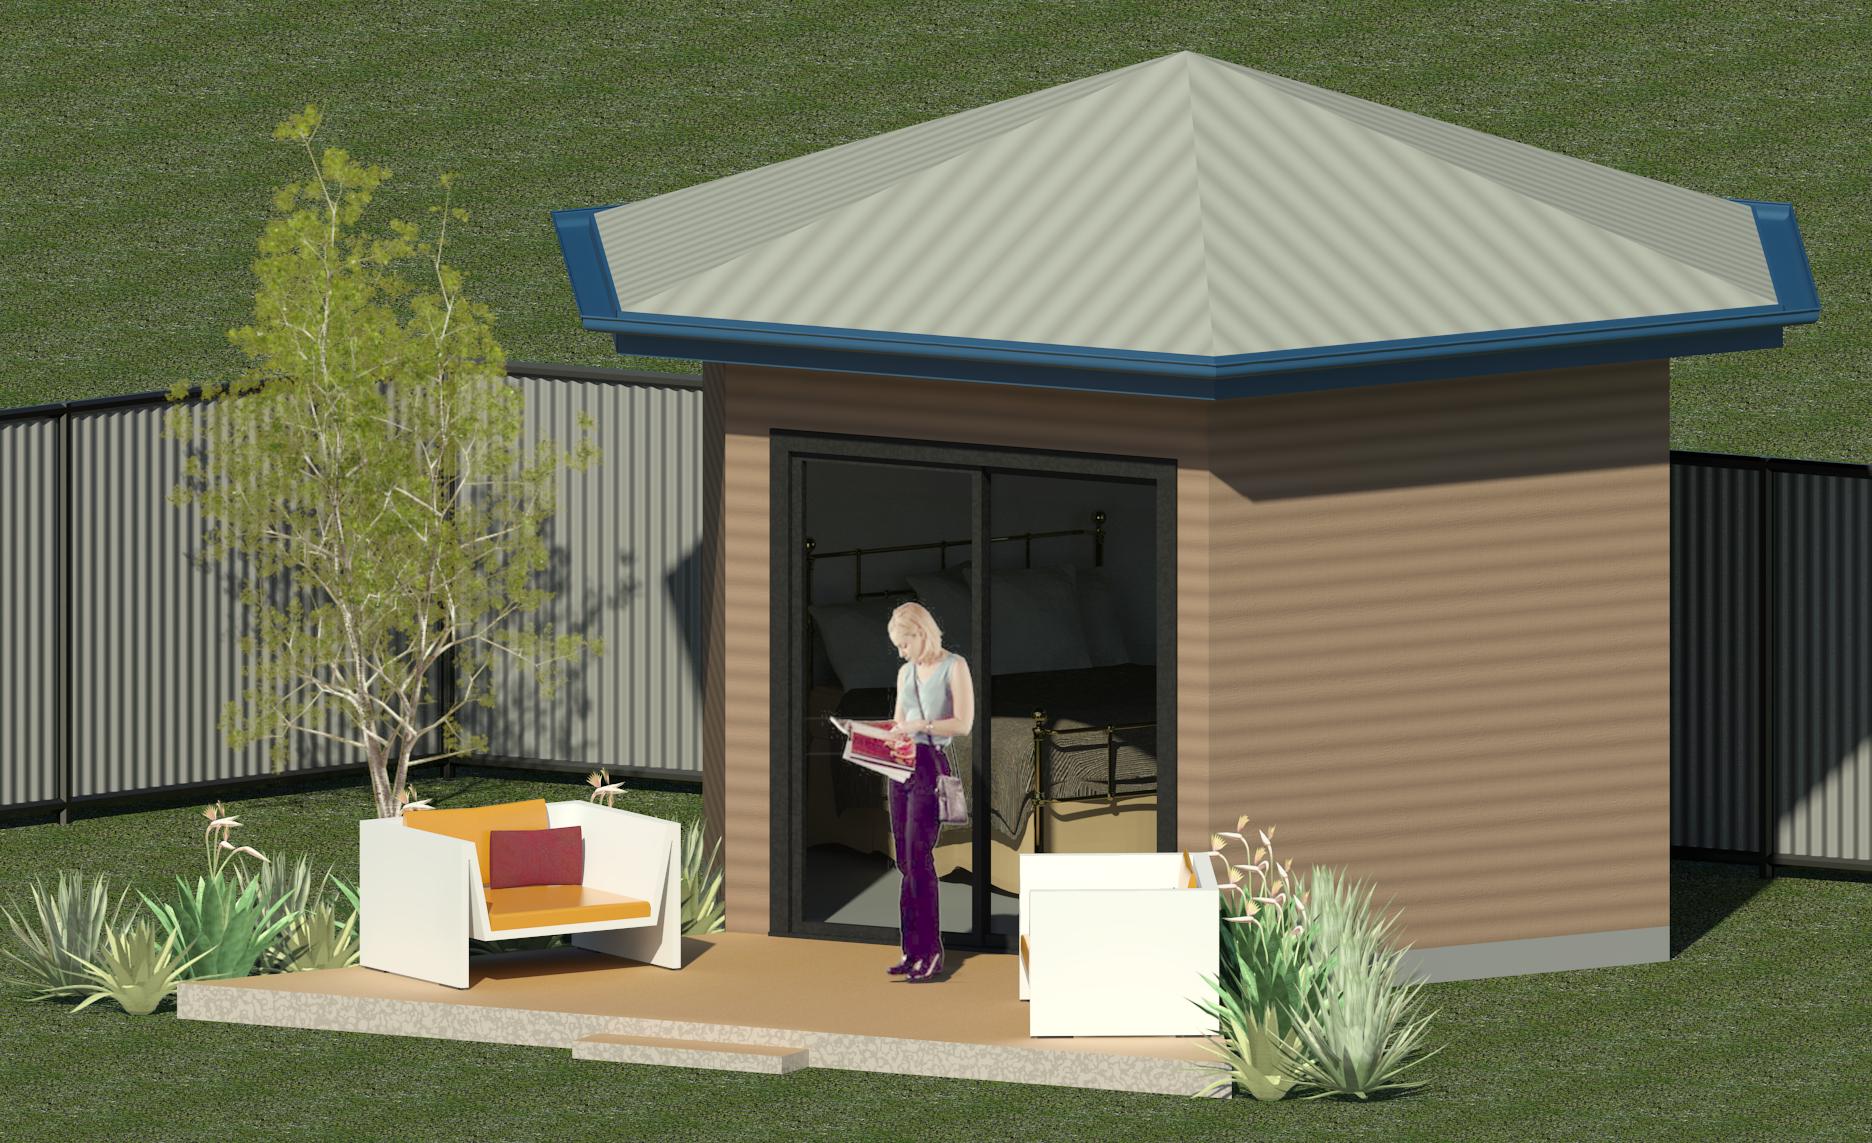 The Yurt Steel House Framed Shed Alliance Latest News Shed